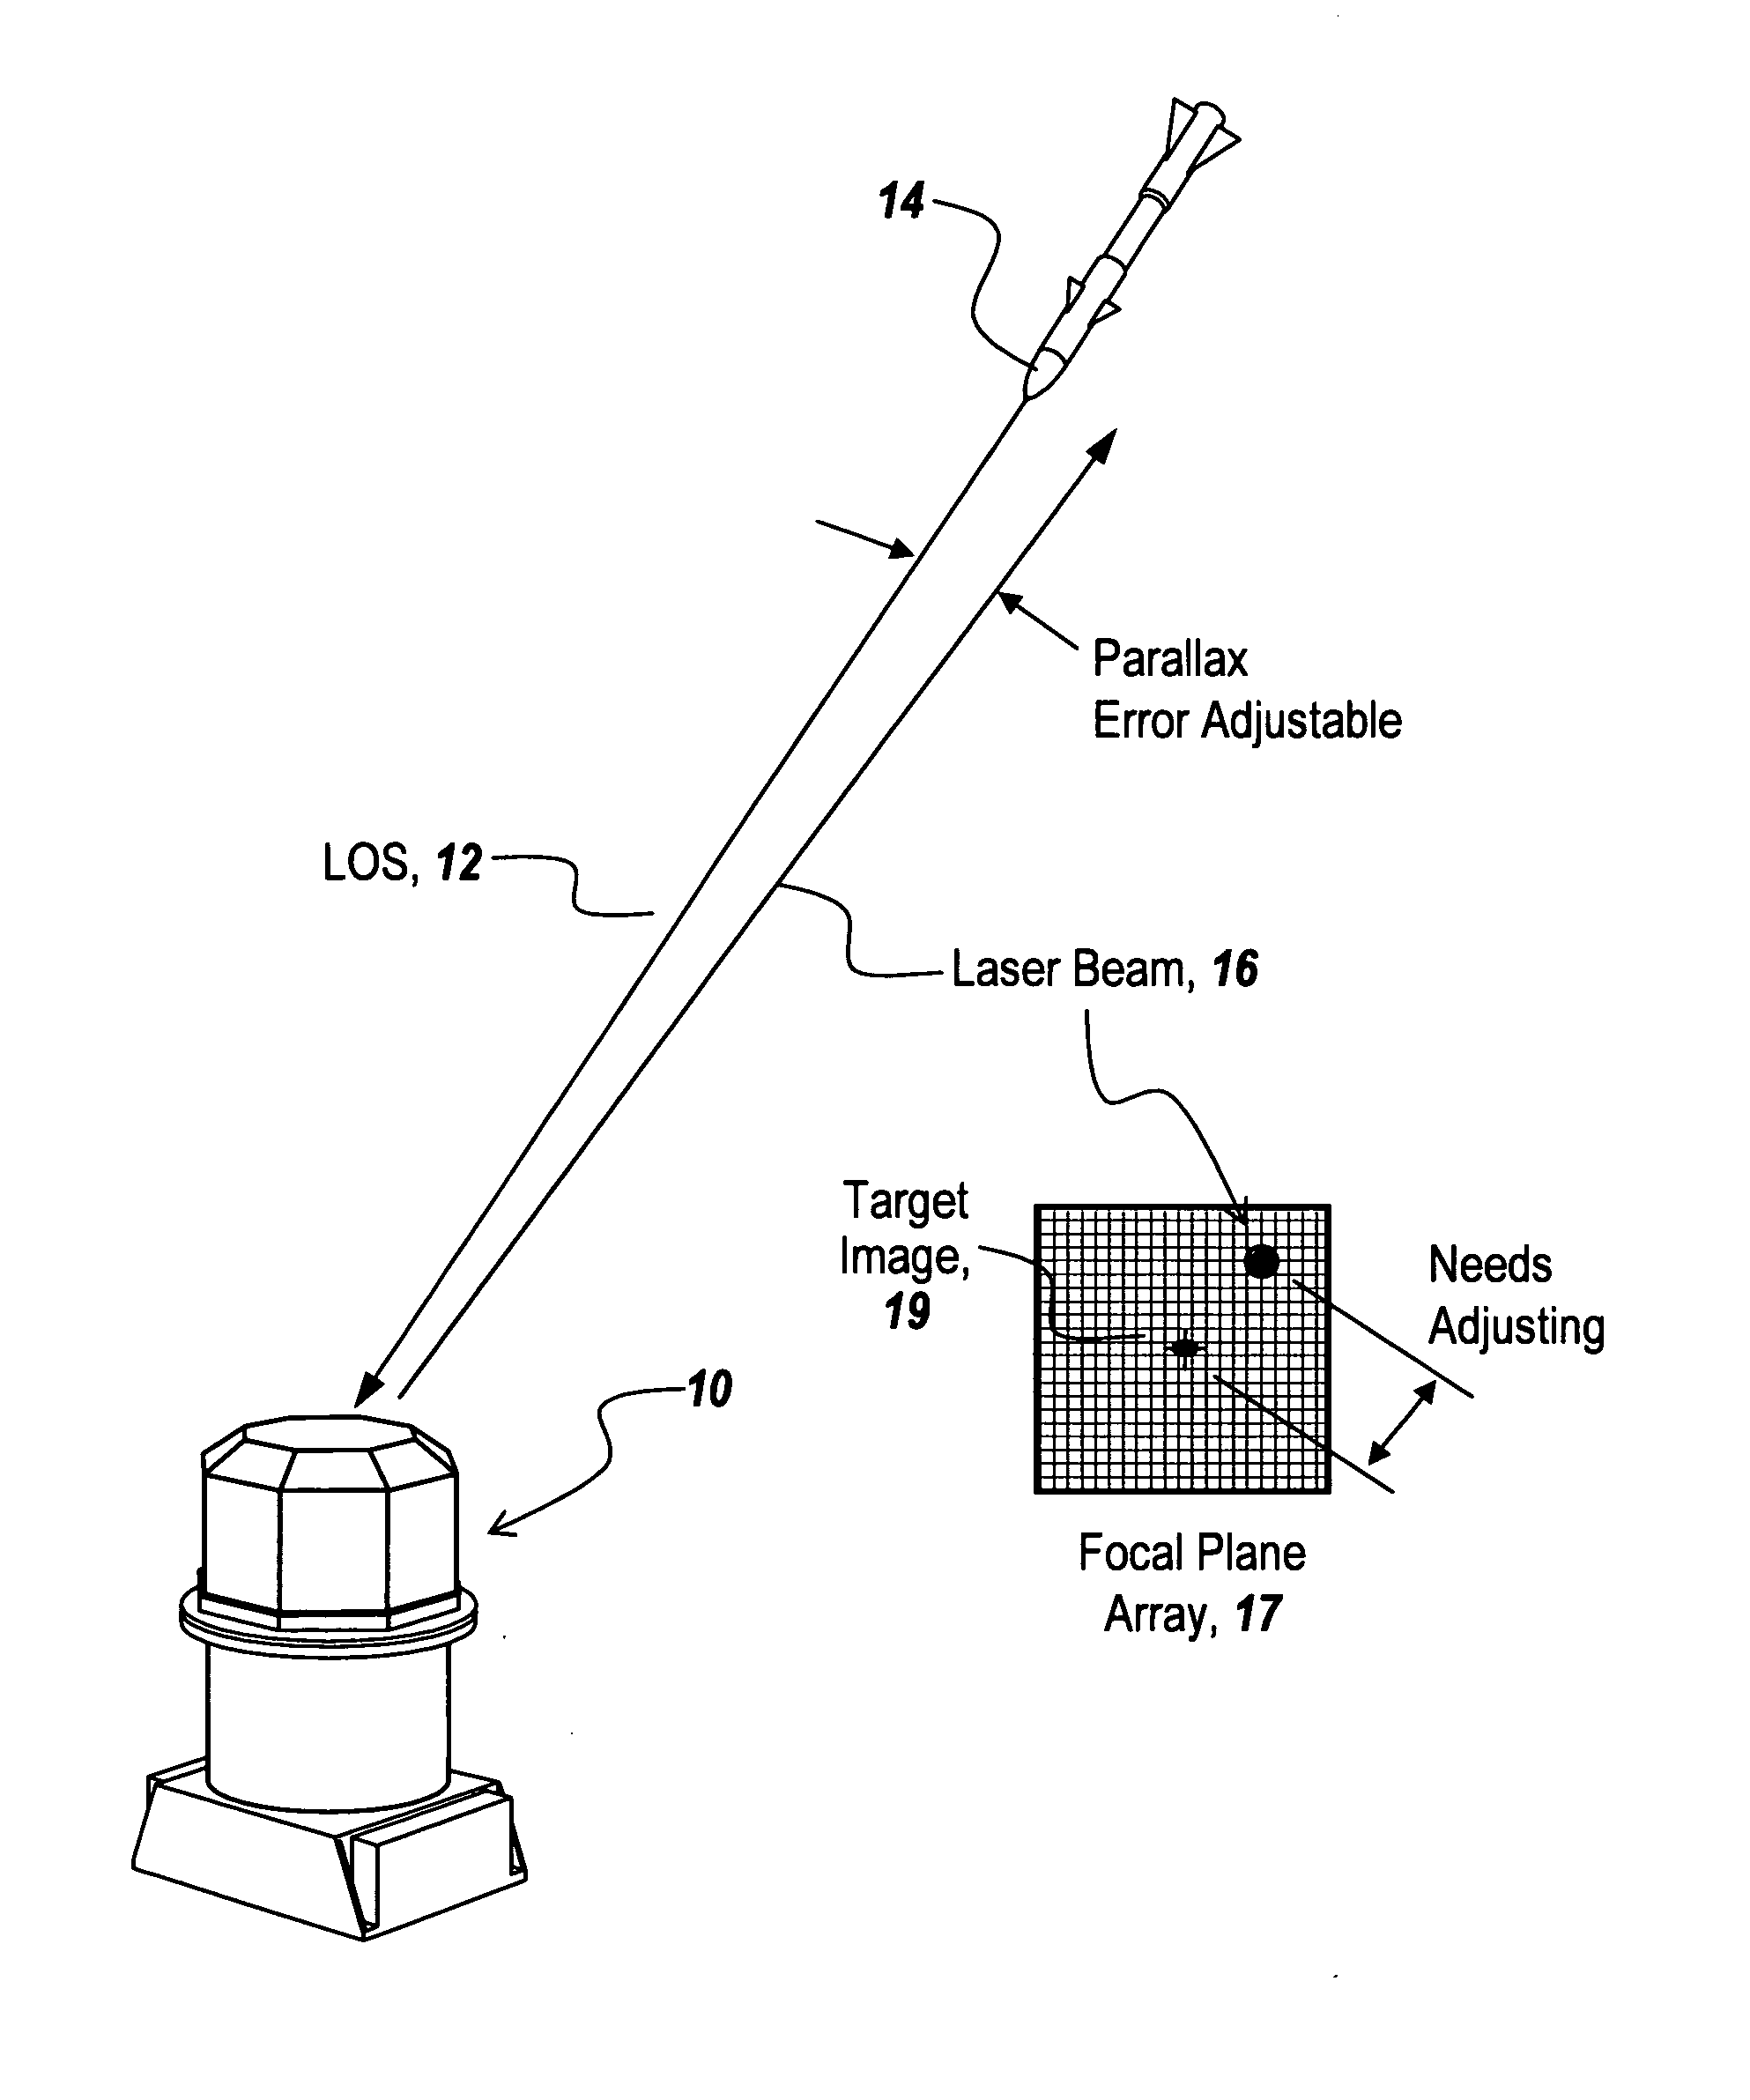 Non-adjustable pointer-tracker gimbal used for directed infrared countermeasures systems